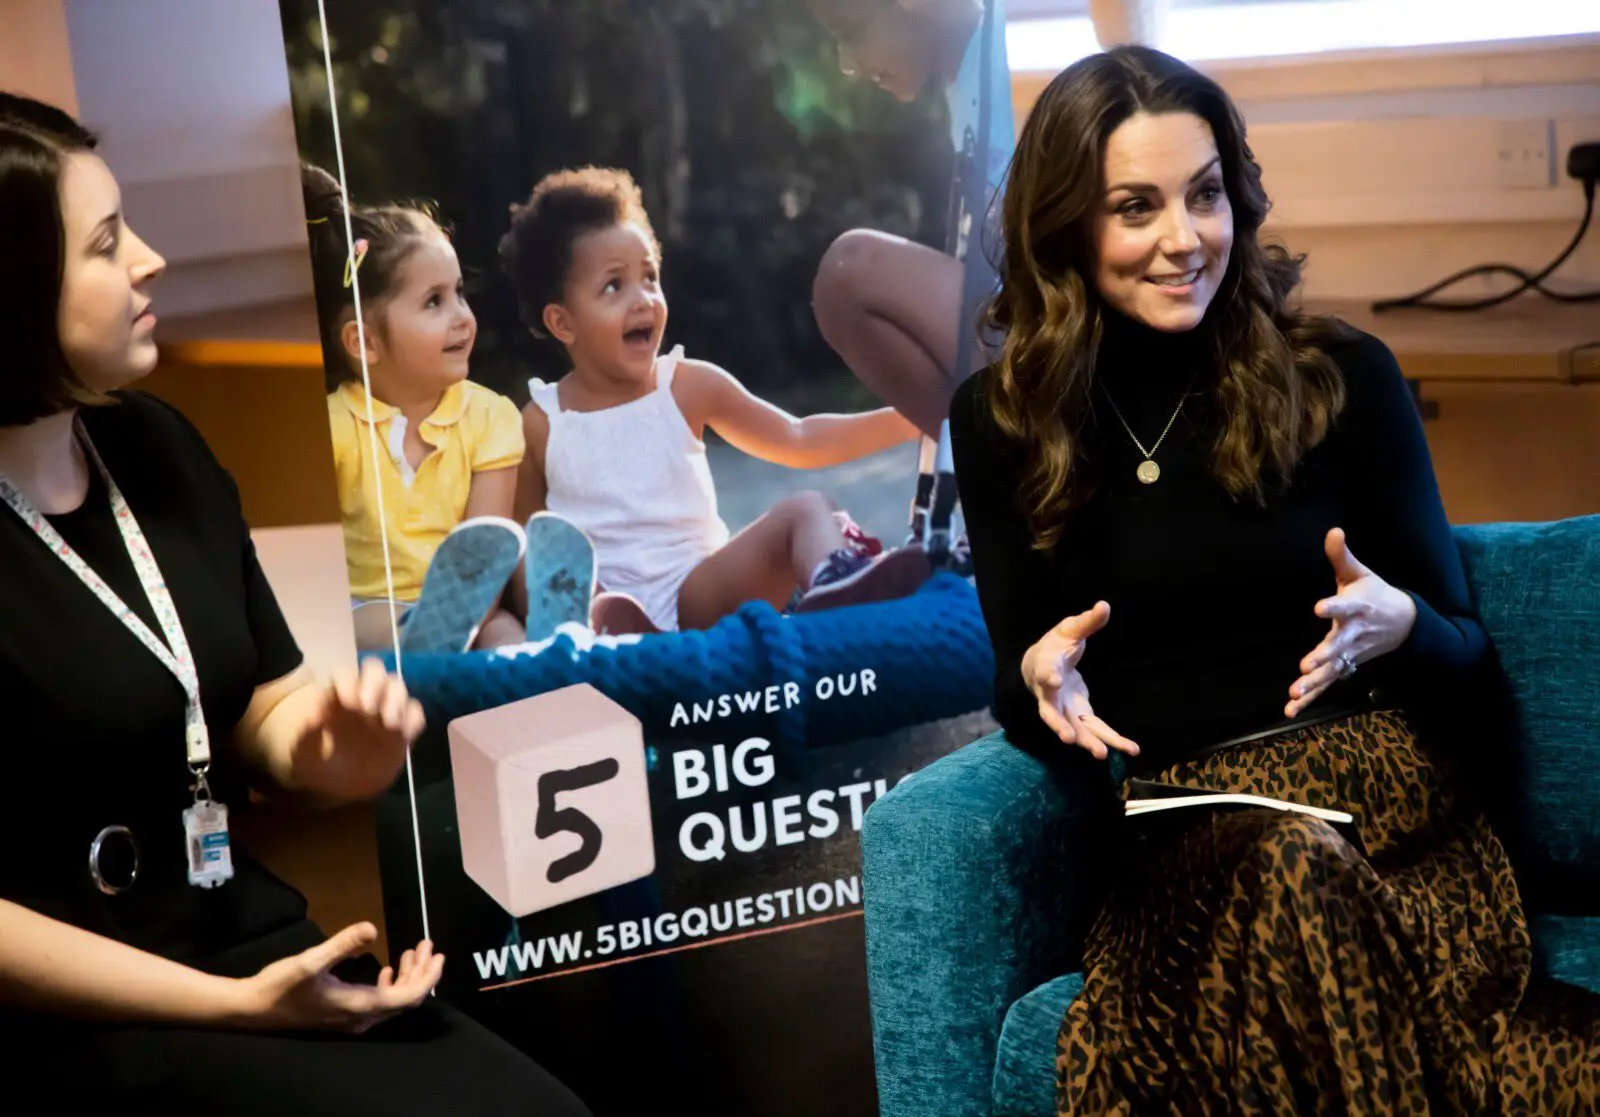 The Duchess of Cambridge took her 5 Big question survey to Cardiff